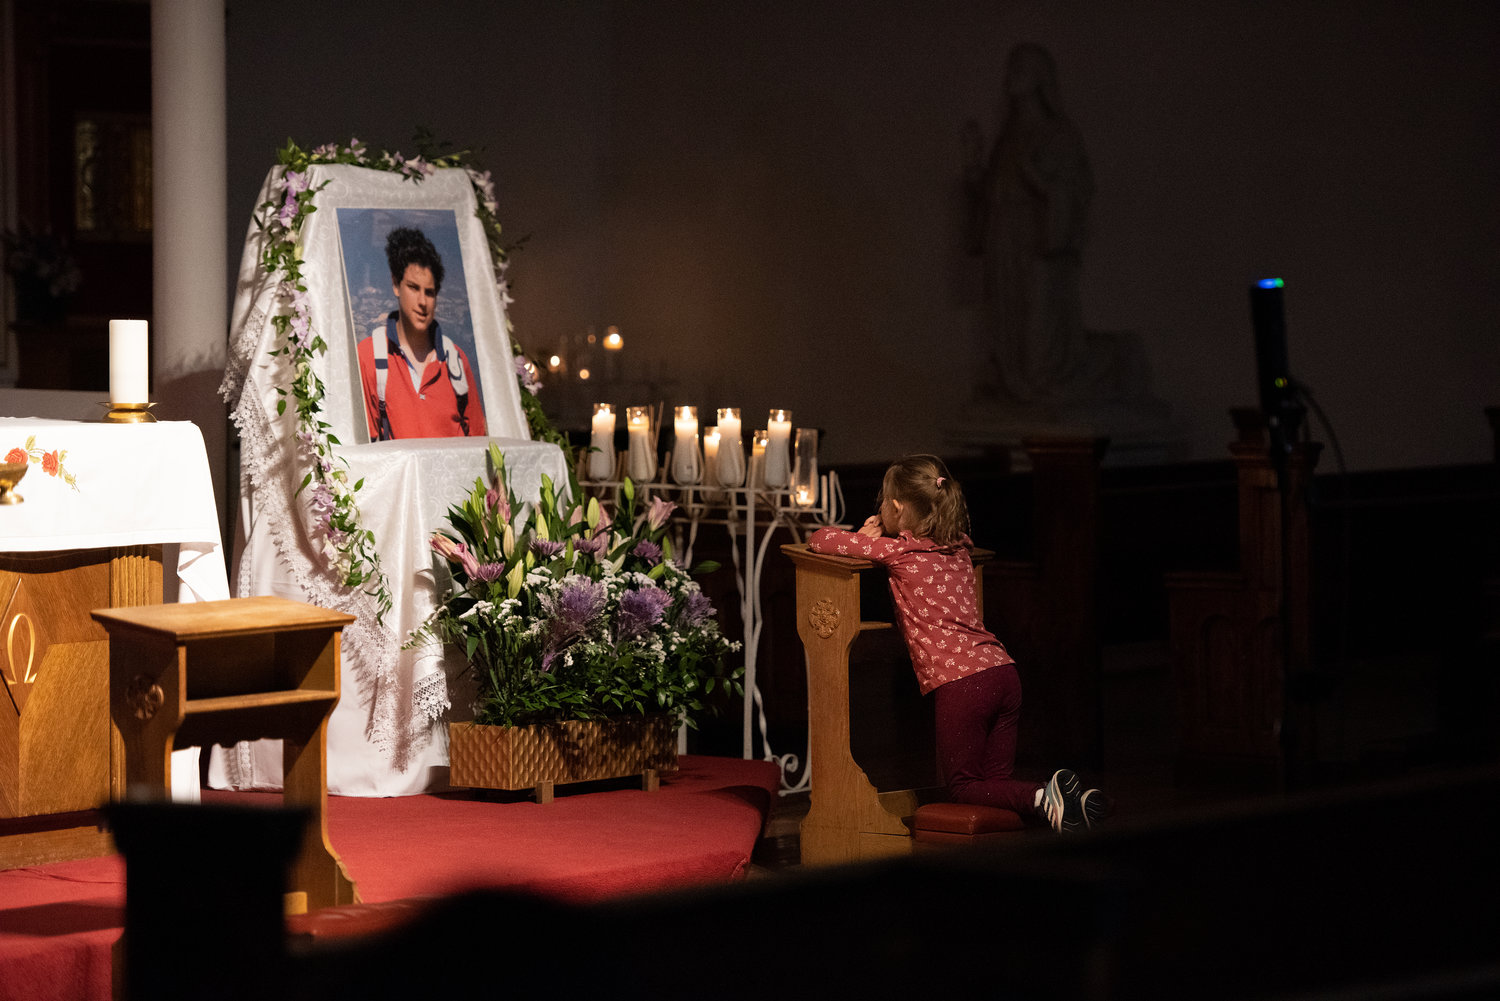 A little girl prays before an image of Blessed Carlo Acutis, top, during an evening gathering April 7 featuring Holy Hour, Mass and veneration at St. Rita of Cascia Church in the Bronx.